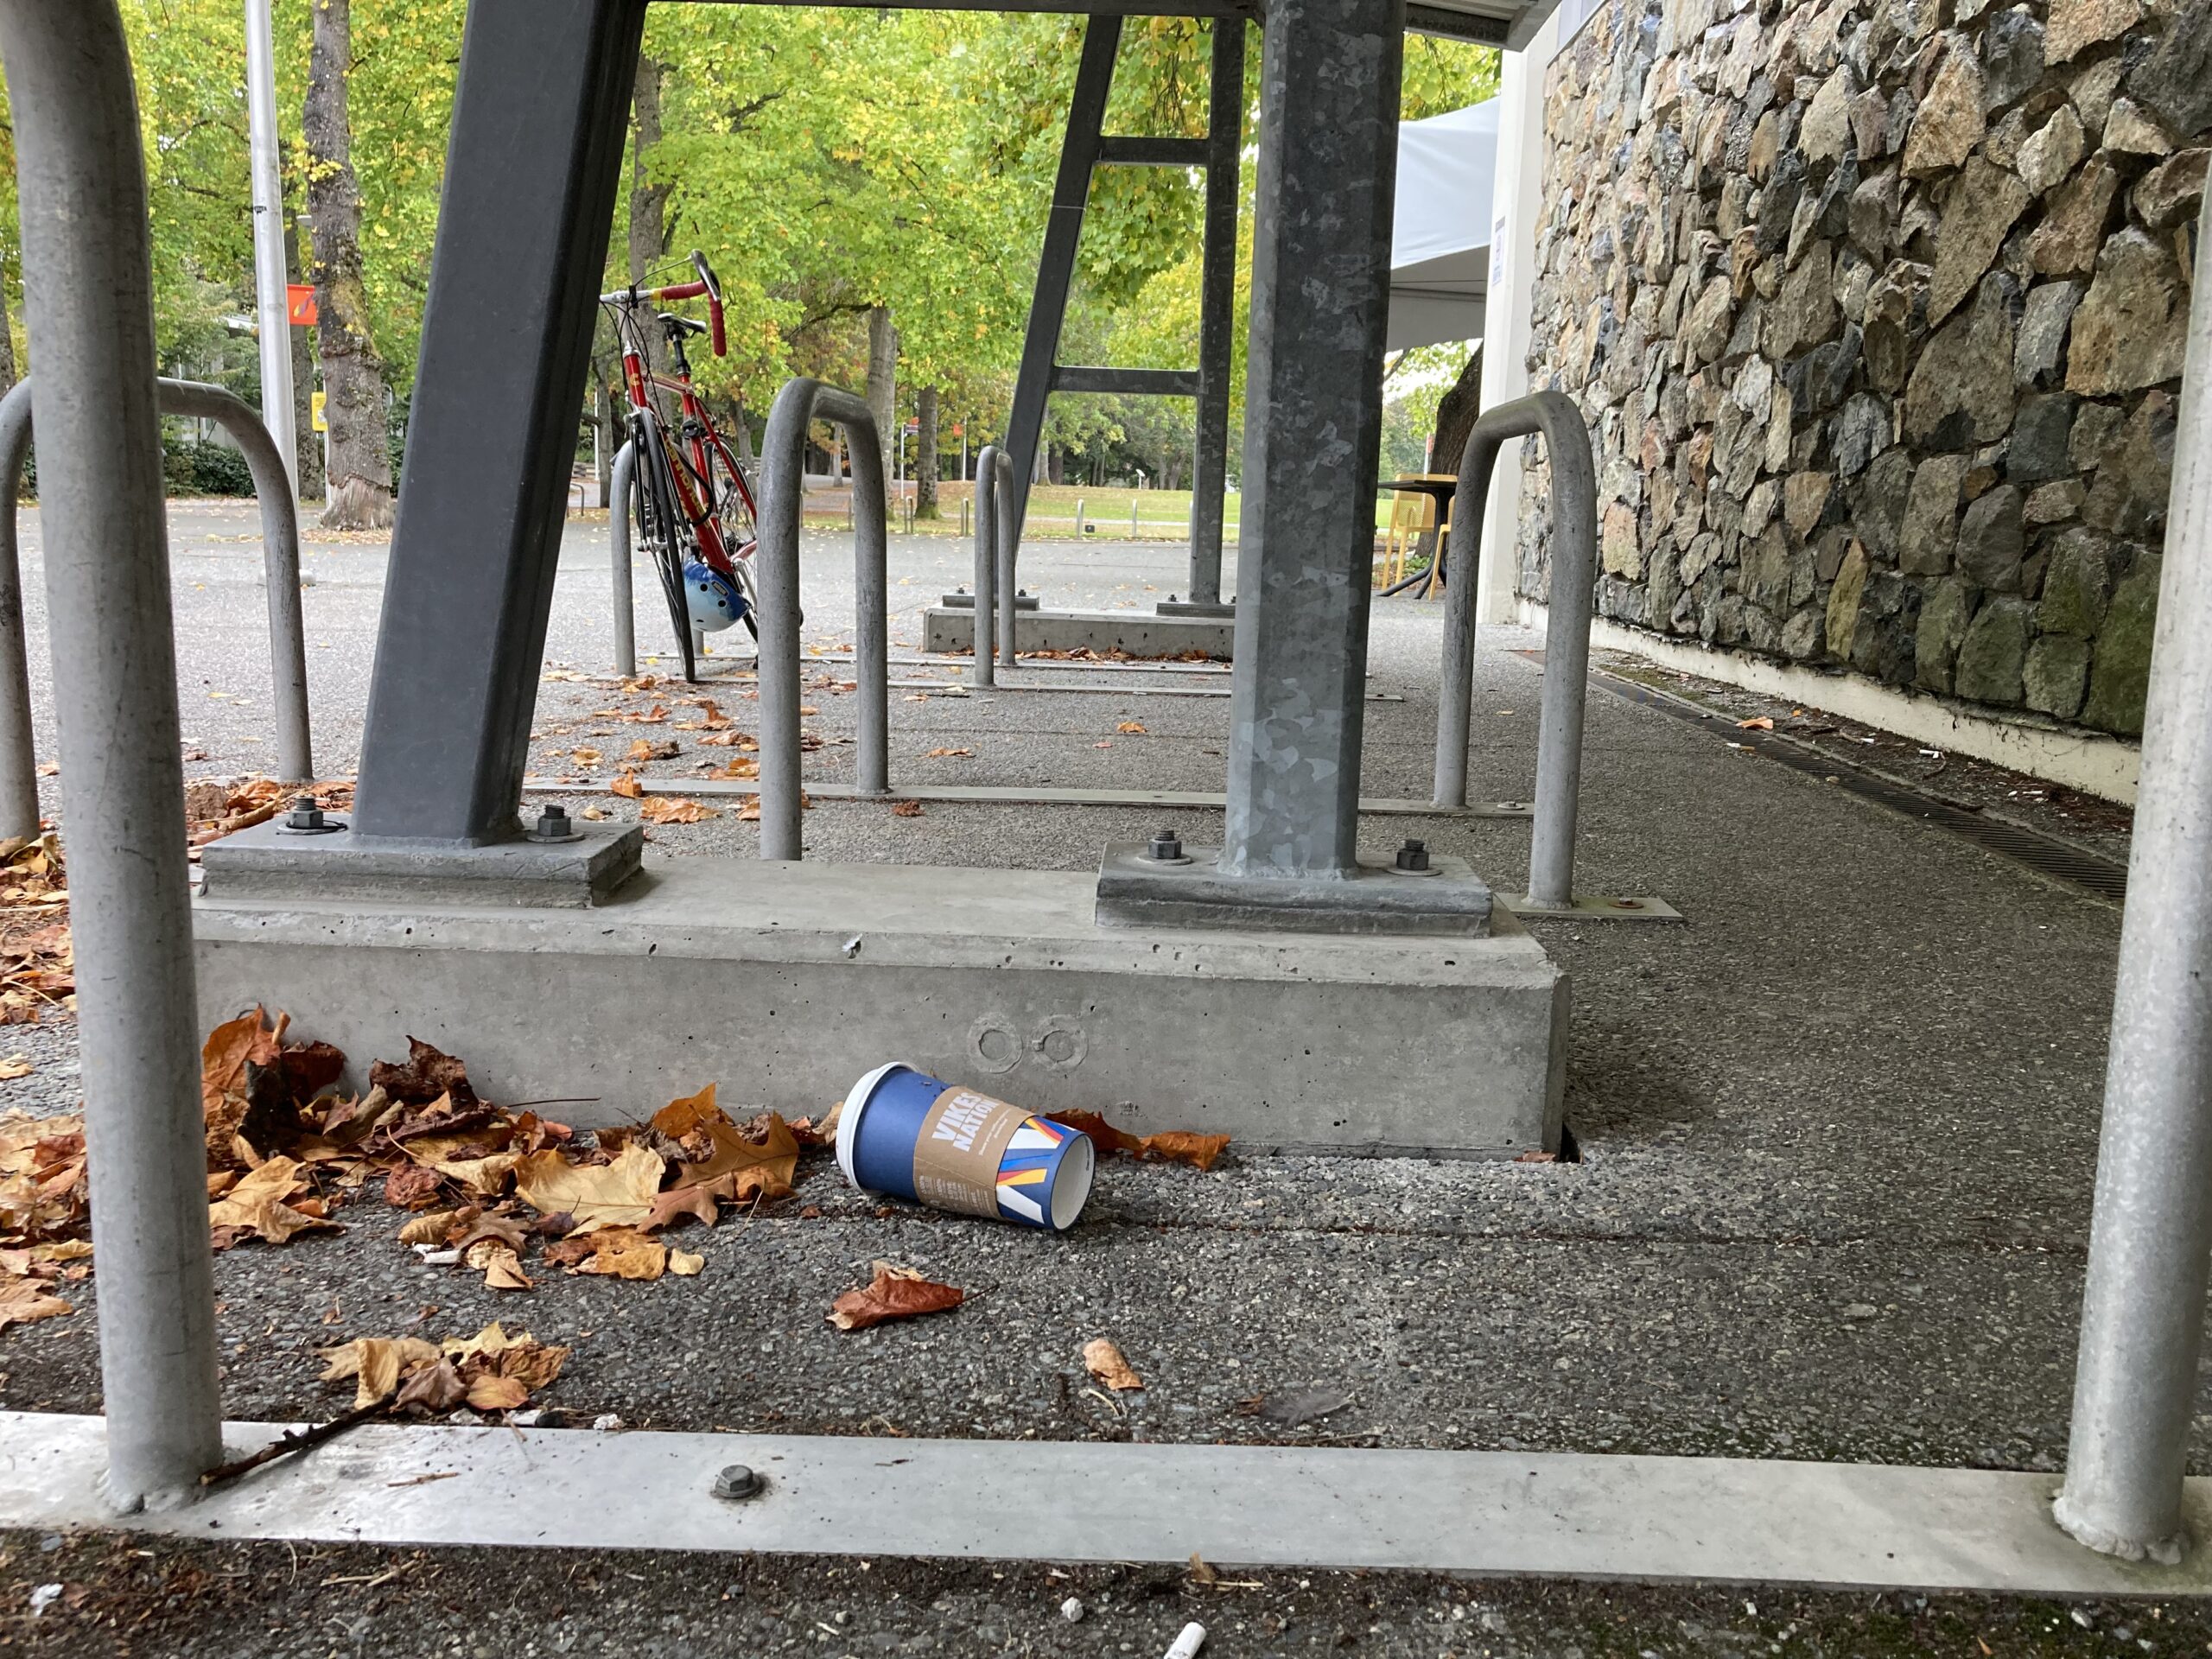 Discarded single-use coffee cup on campus. Photo by Mary Heeg.